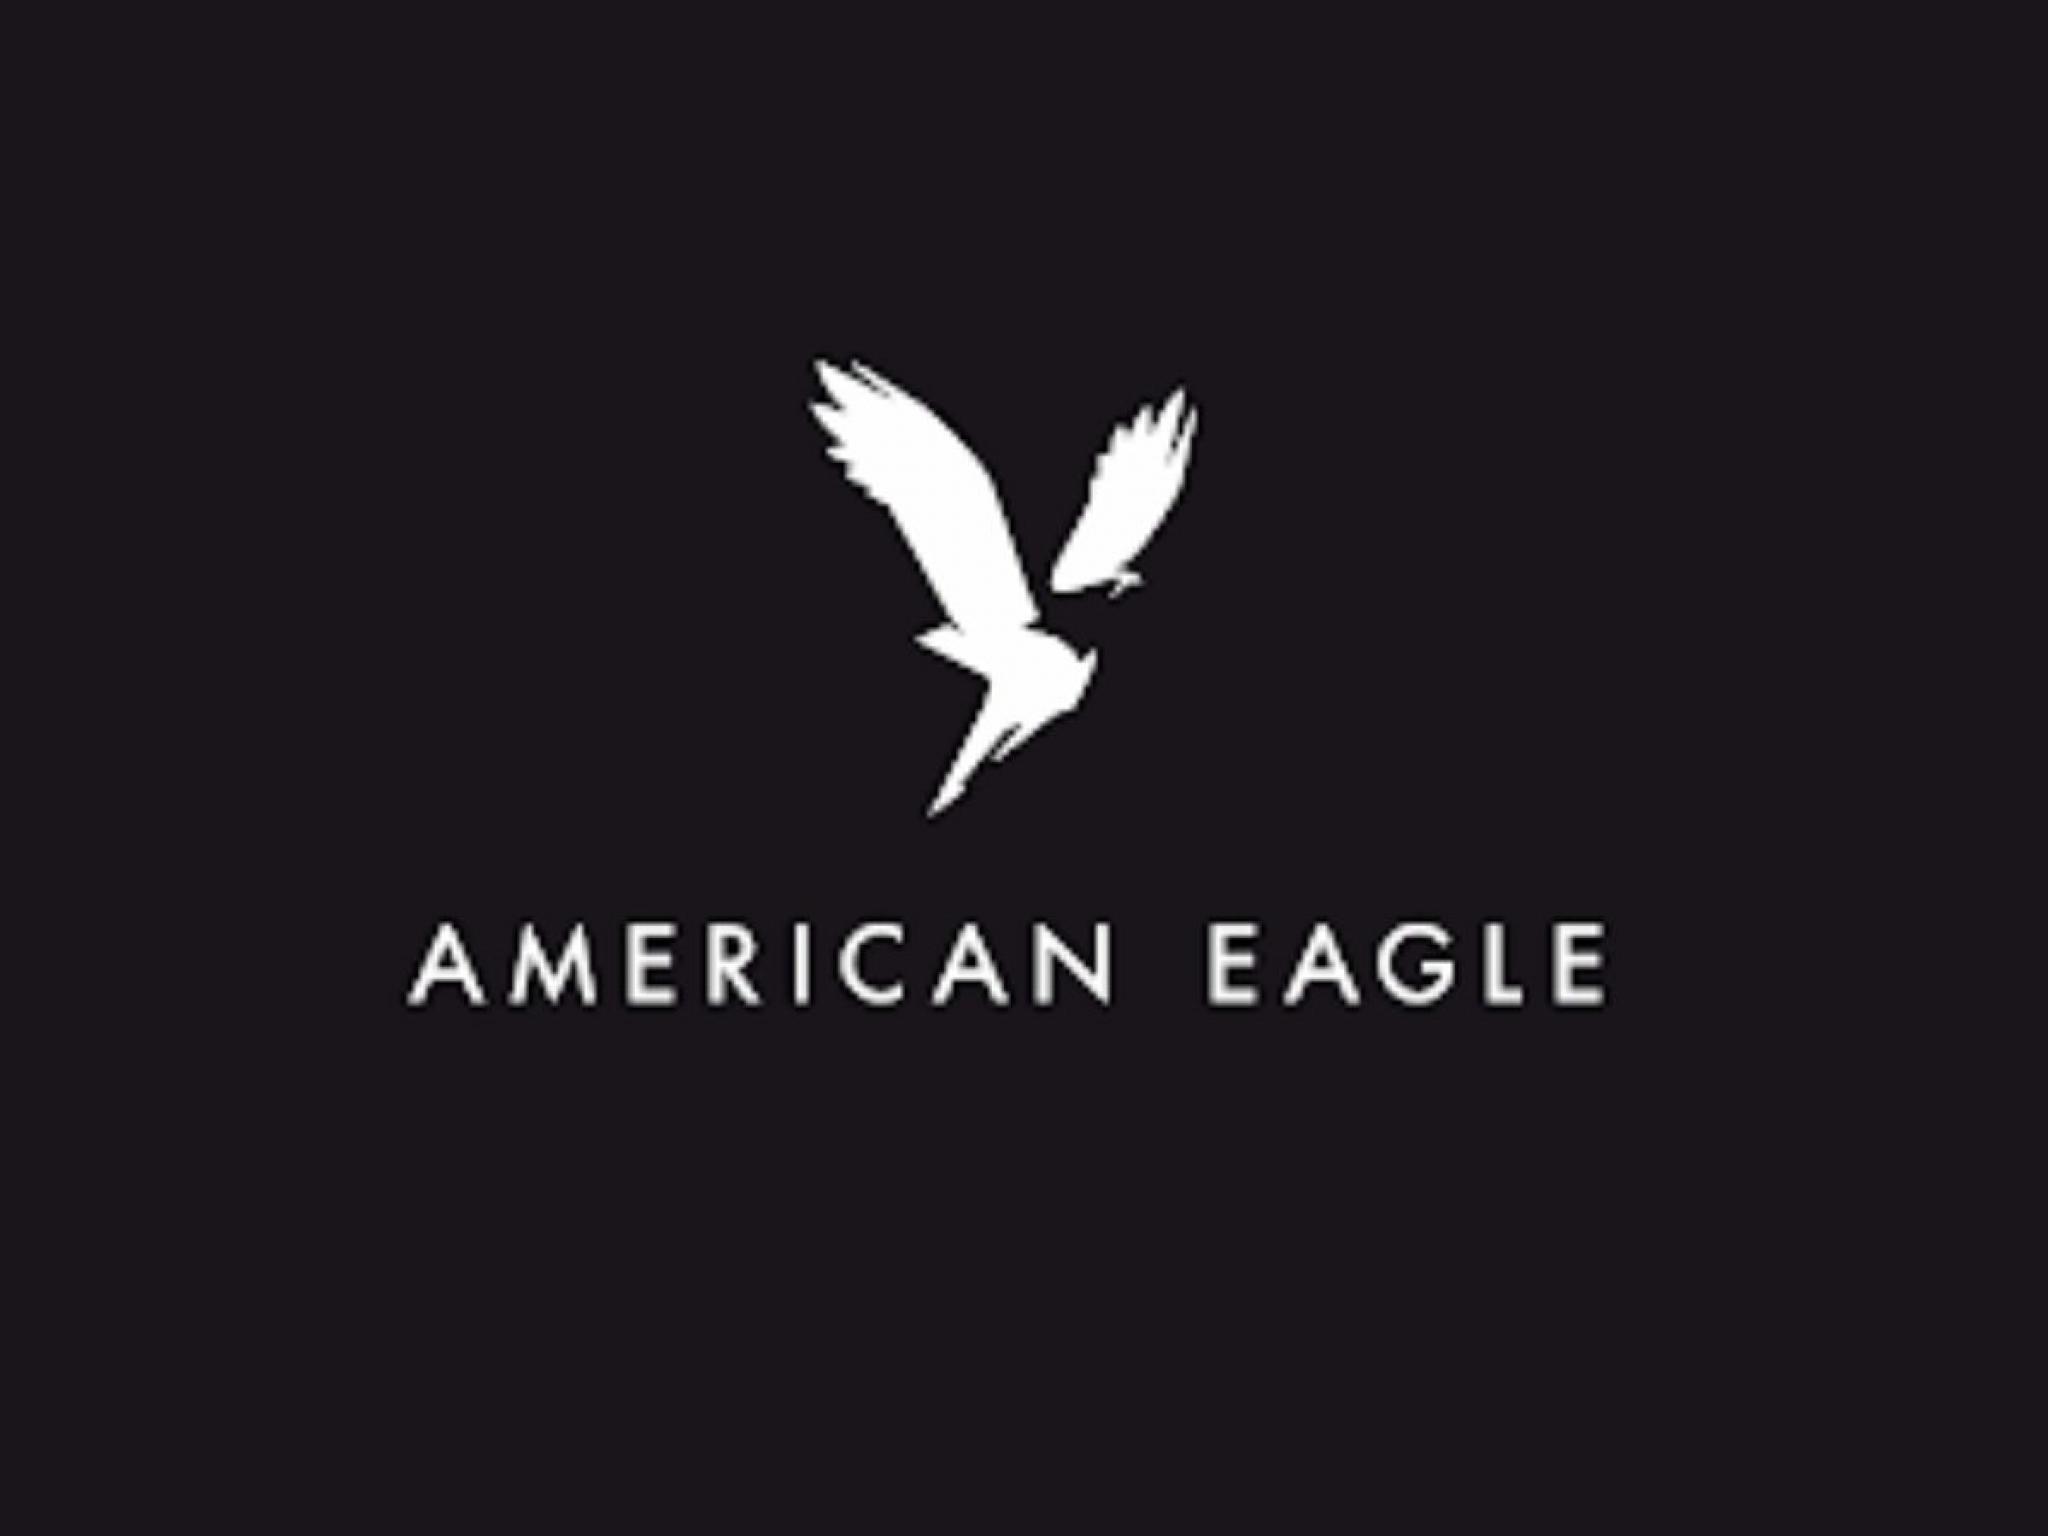  why-american-eagle-shares-are-trading-lower-by-around-16-here-are-other-stocks-moving-in-tuesdays-mid-day-session 